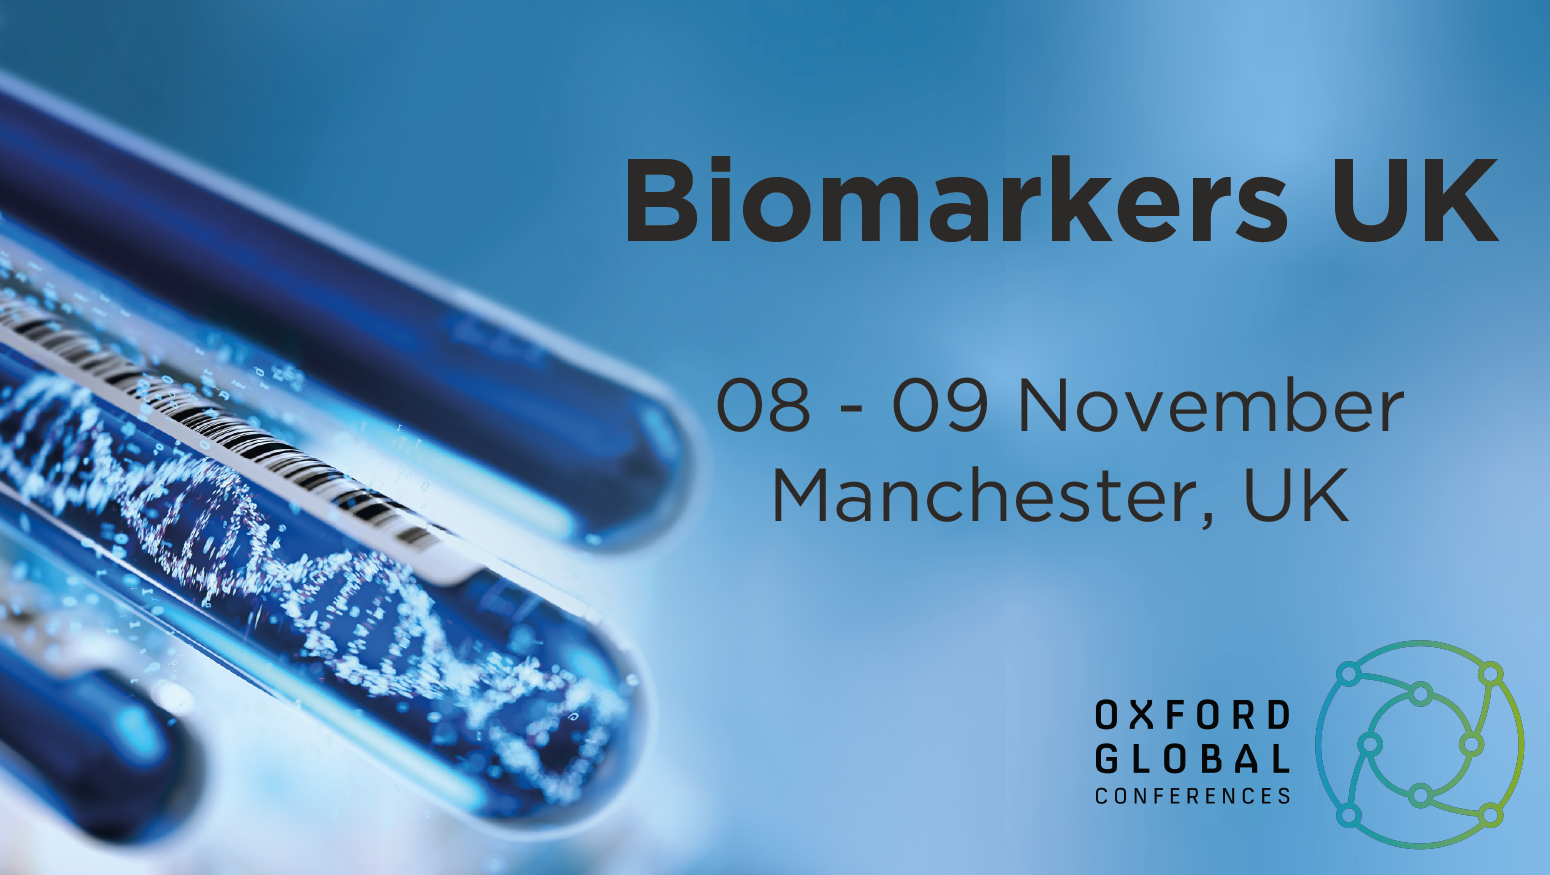 Biomarkers UK 2021 by Oxford Global